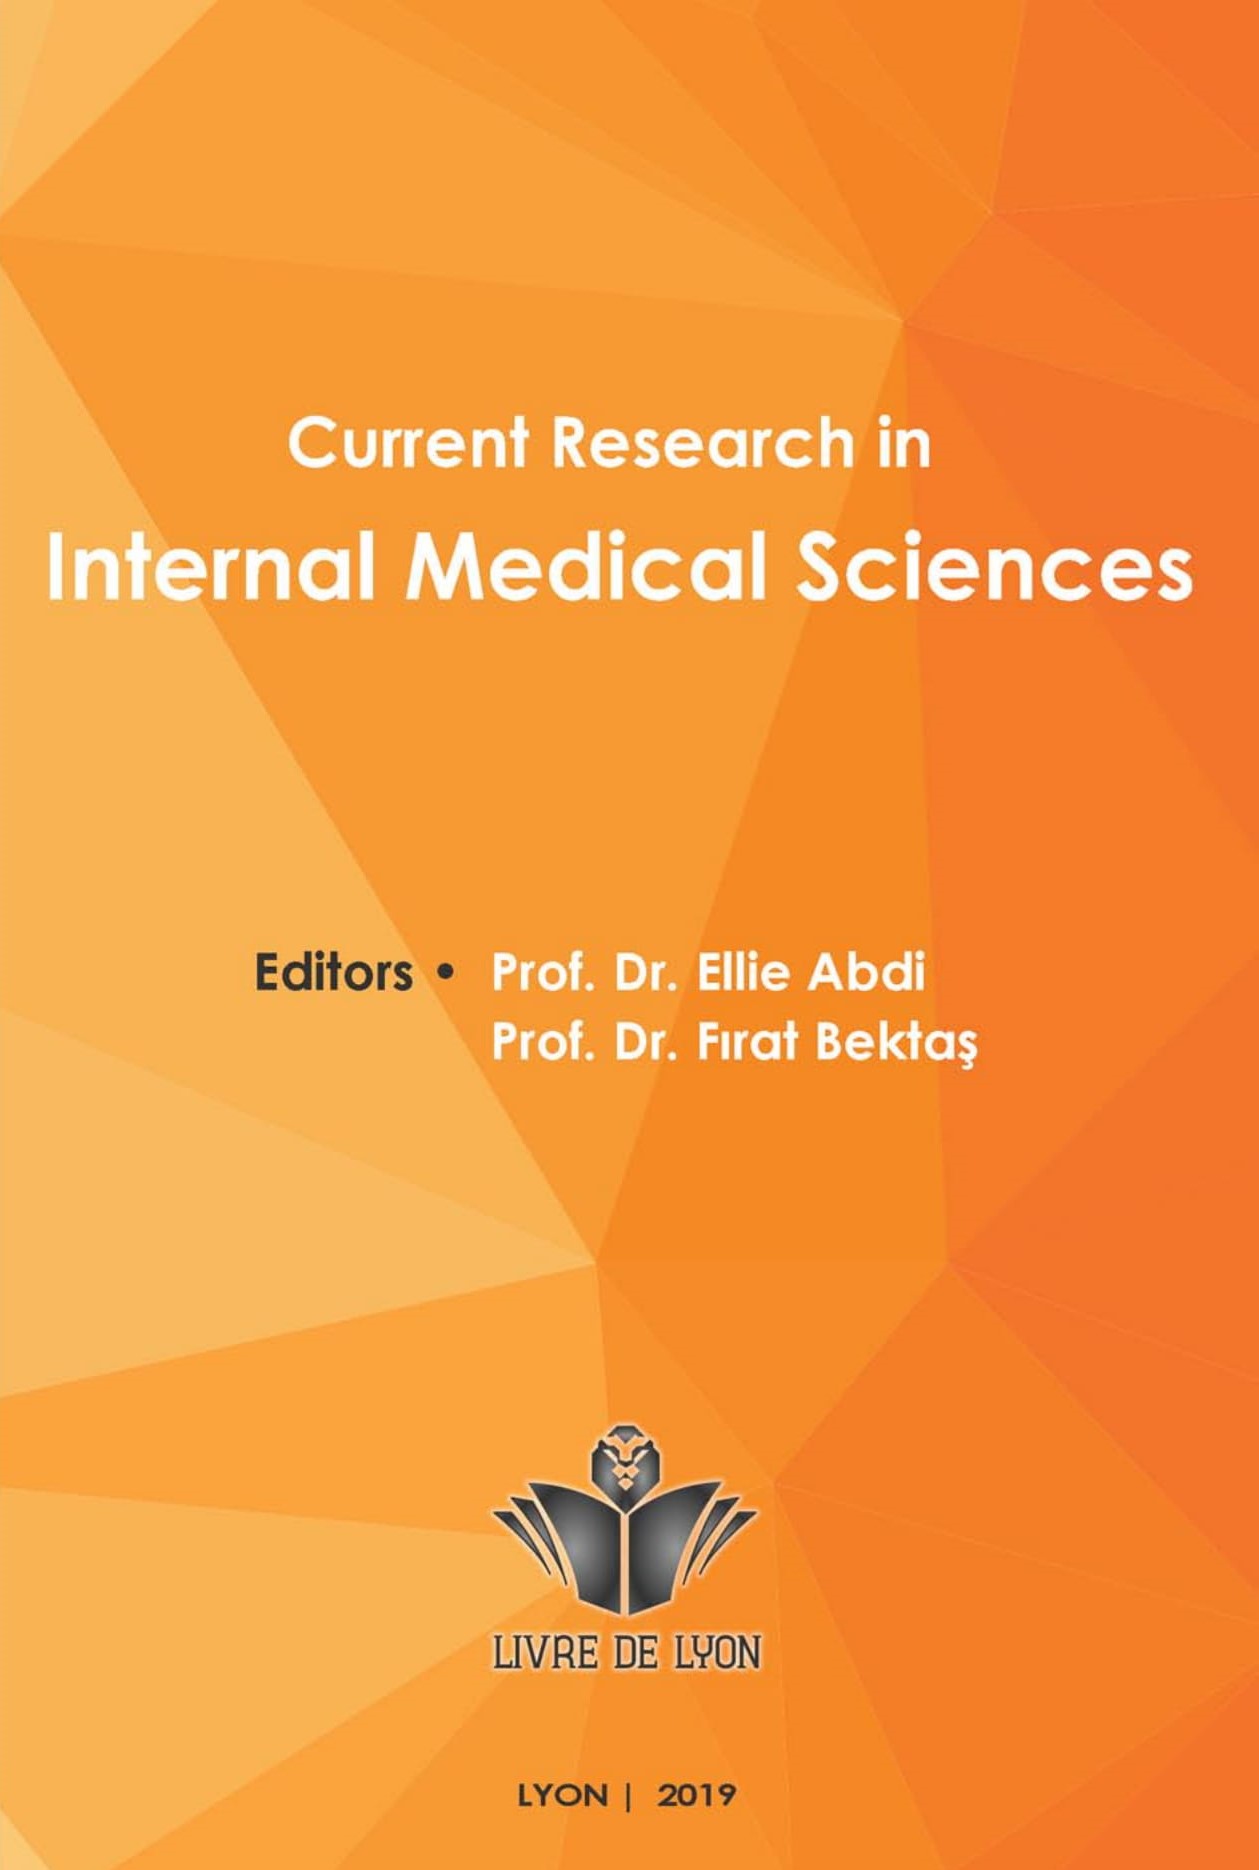 Current Research in Internal Medical Sciences